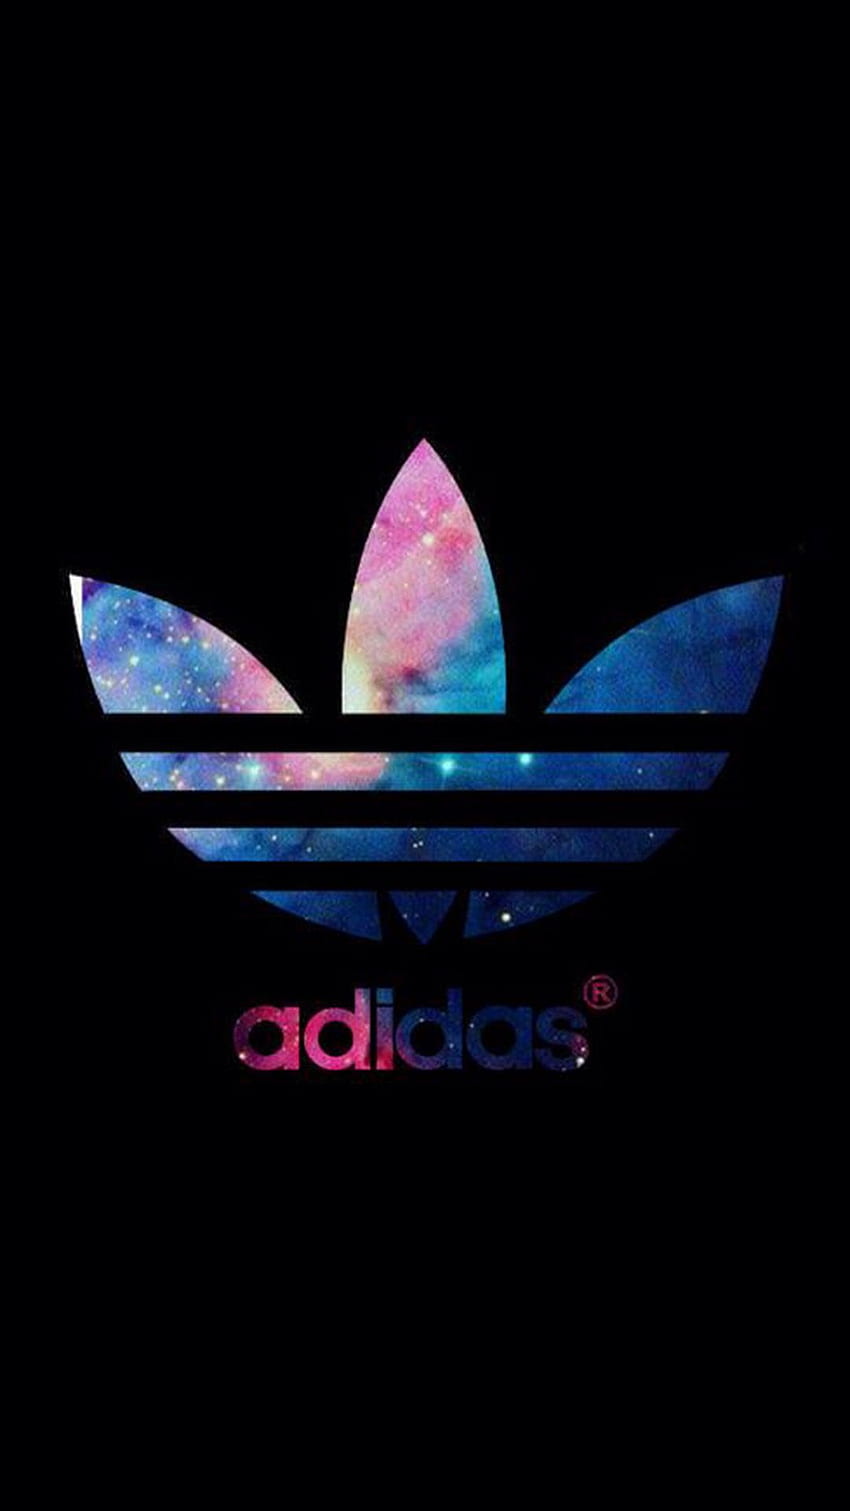 Awesome Adidas iPhone Wallpapers - WallpaperAccess | Adidas iphone wallpaper,  Adidas wallpaper iphone, Iphone wallpaper